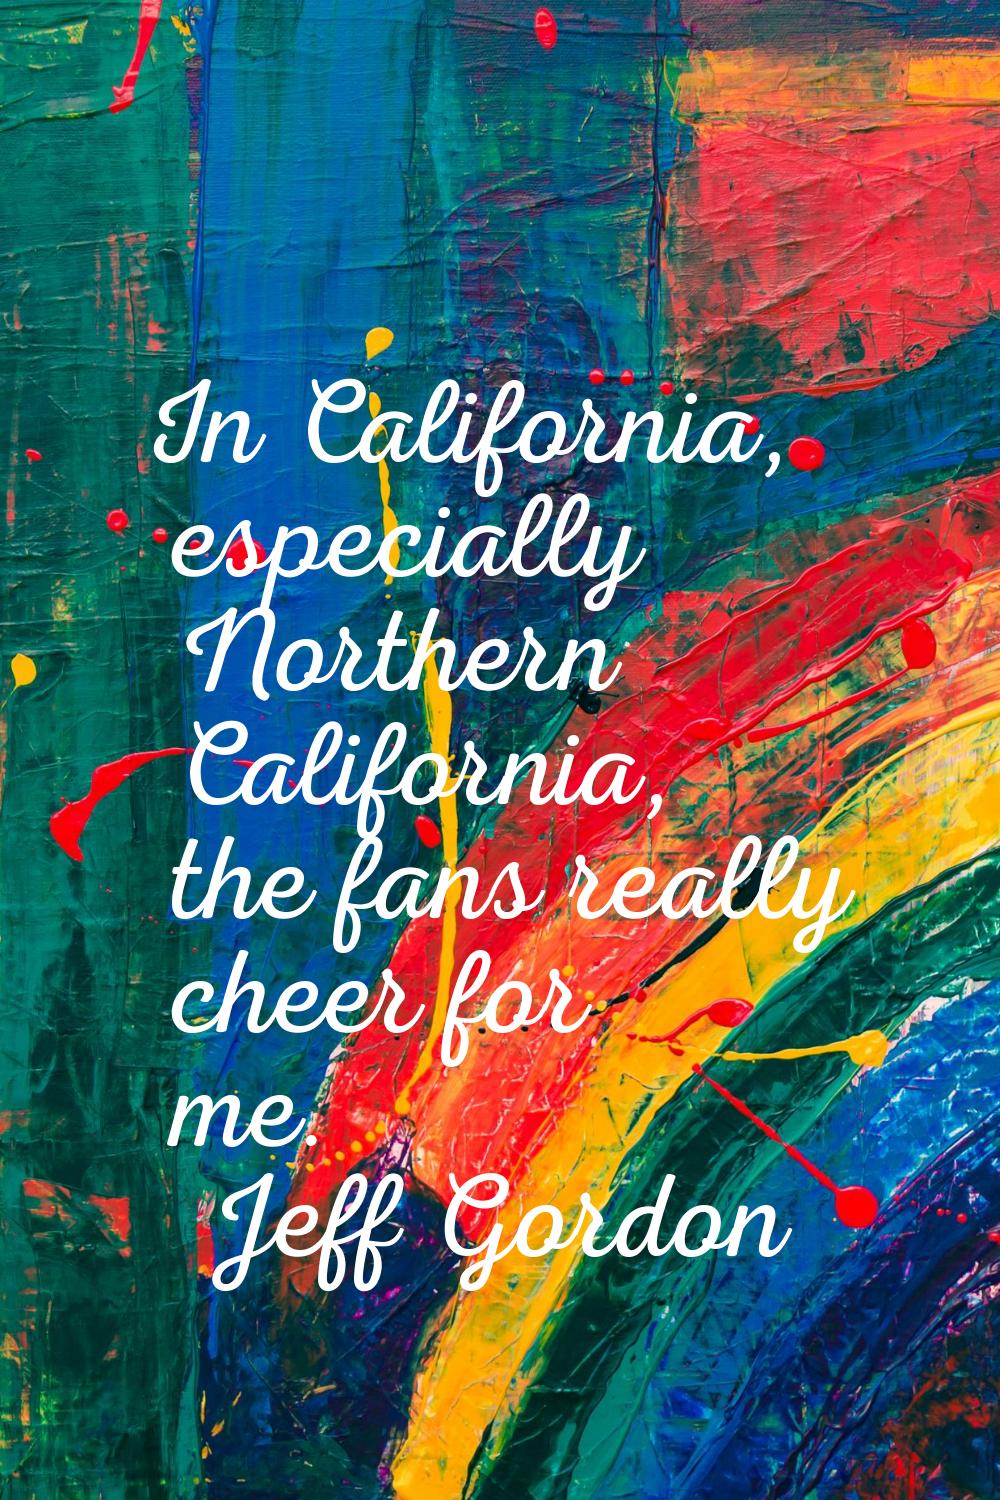 In California, especially Northern California, the fans really cheer for me.